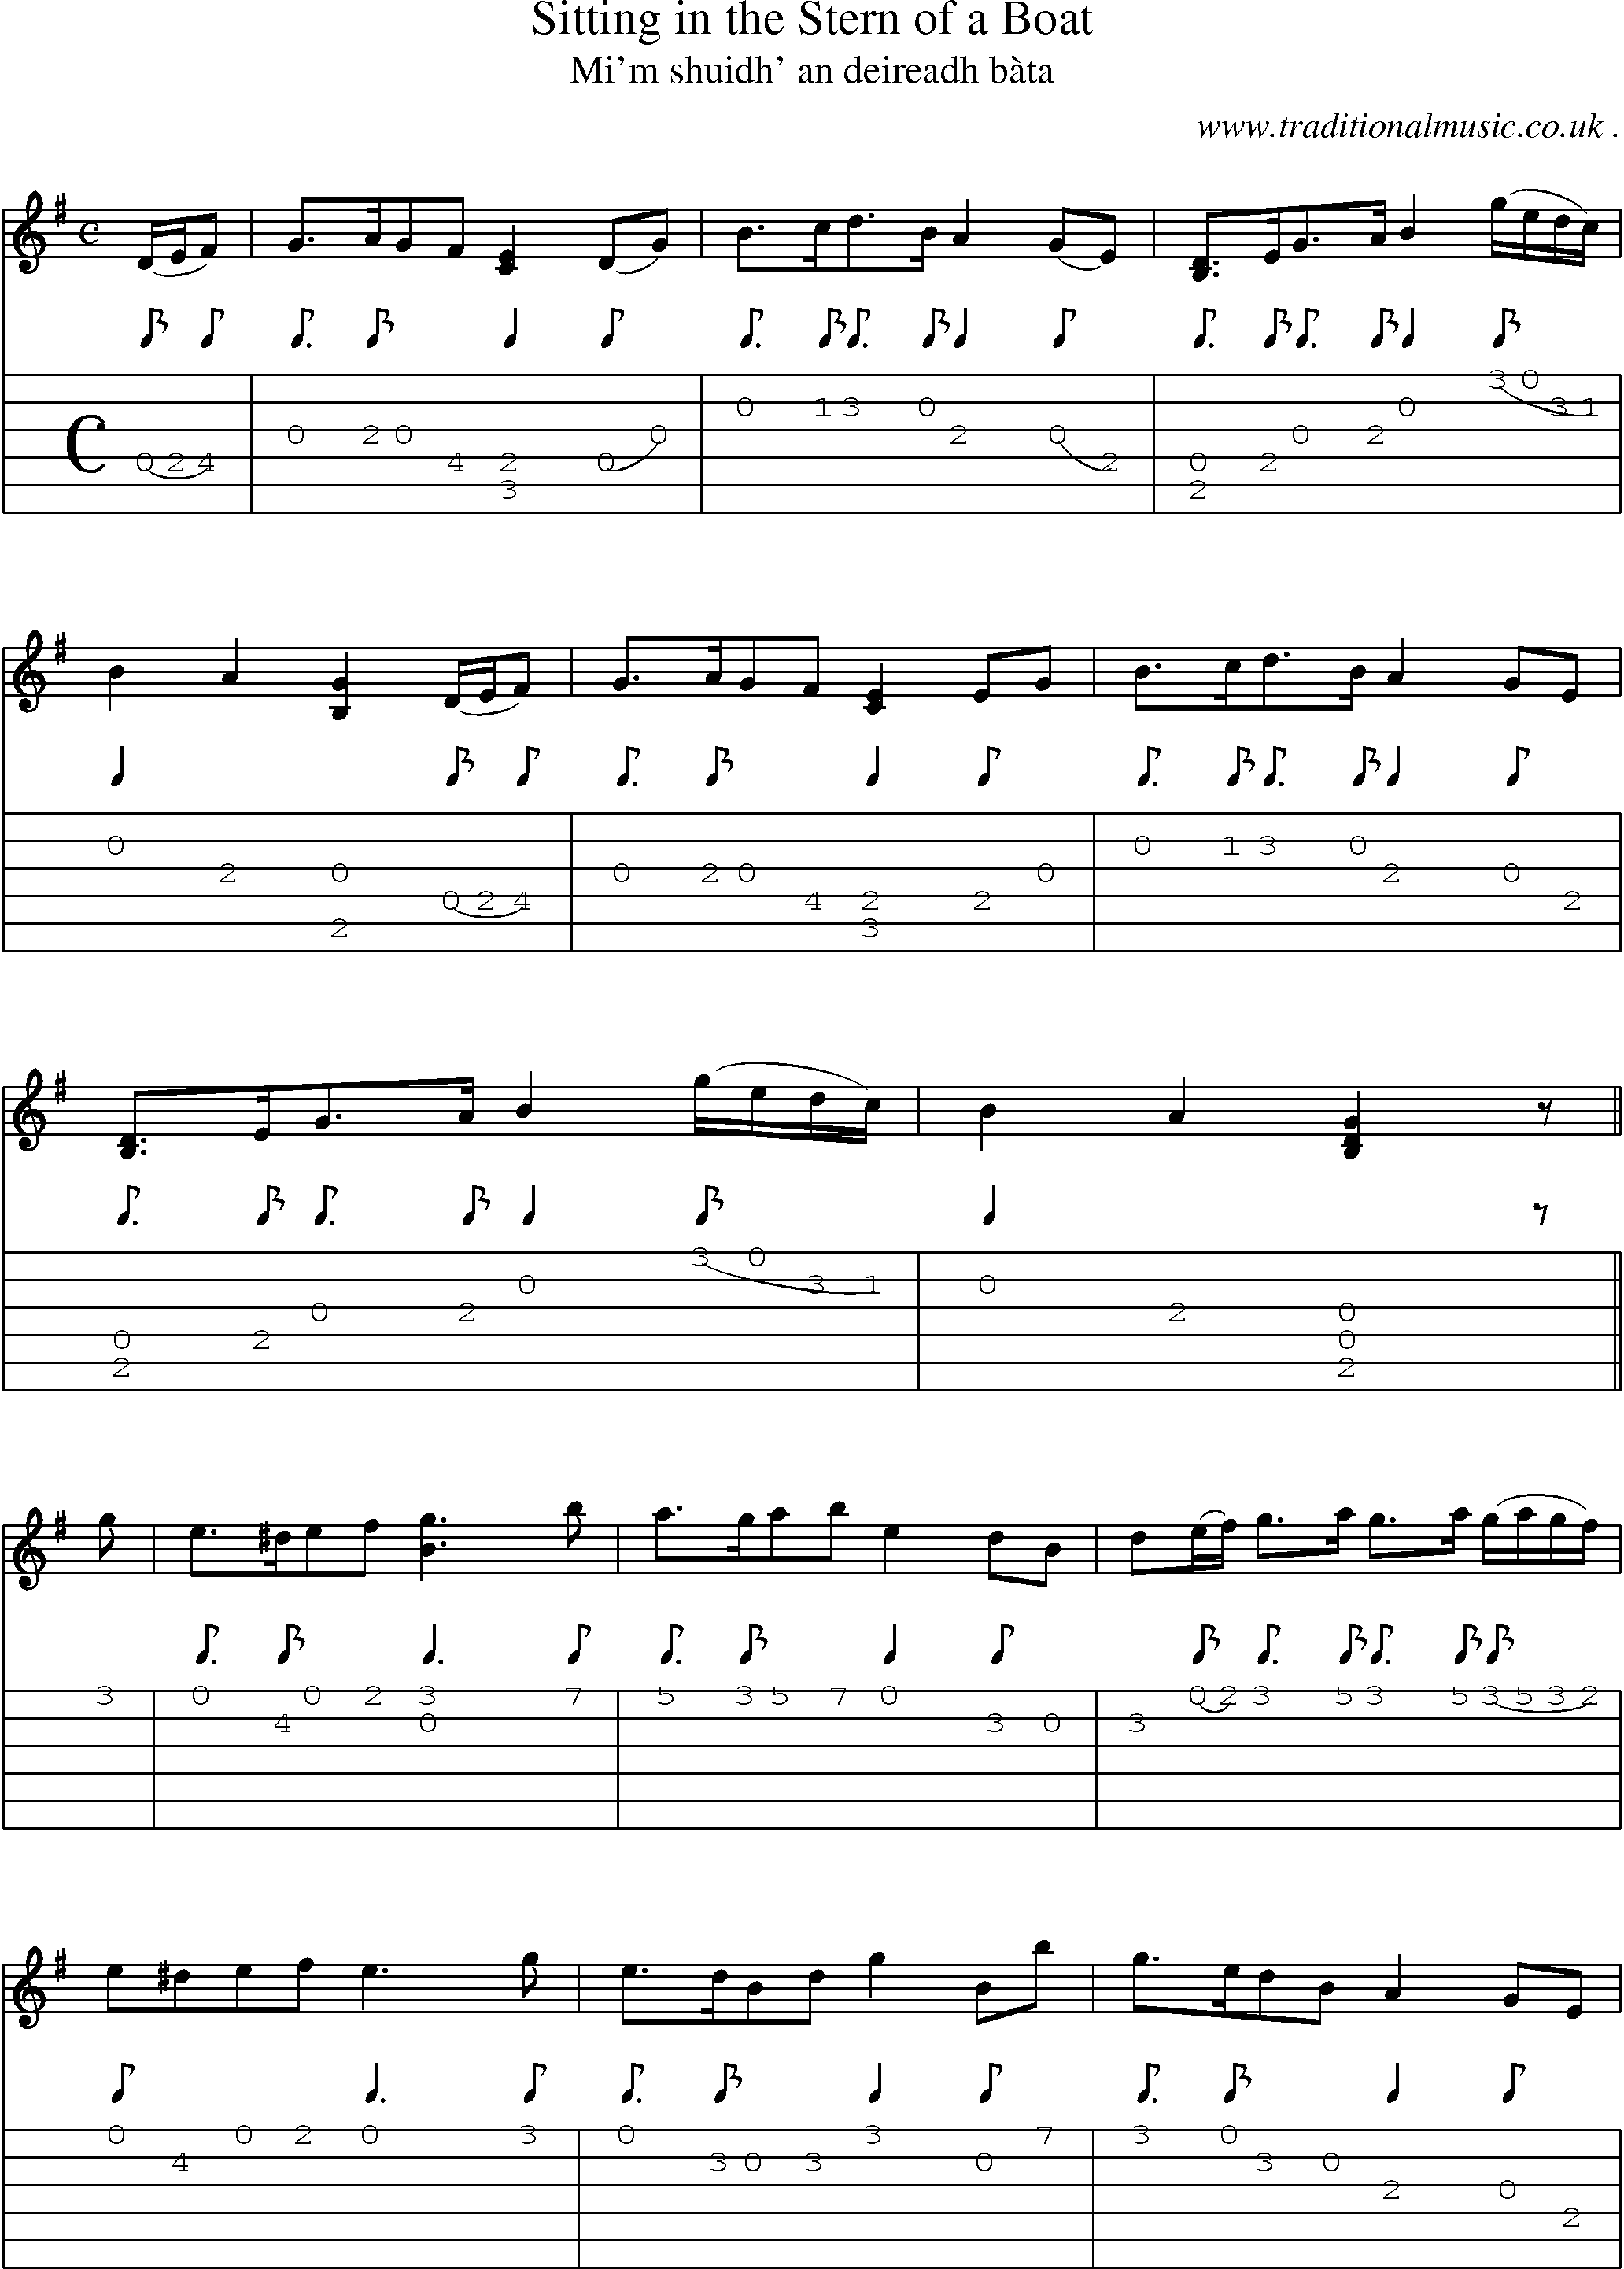 Sheet-music  score, Chords and Guitar Tabs for Sitting In The Stern Of A Boat